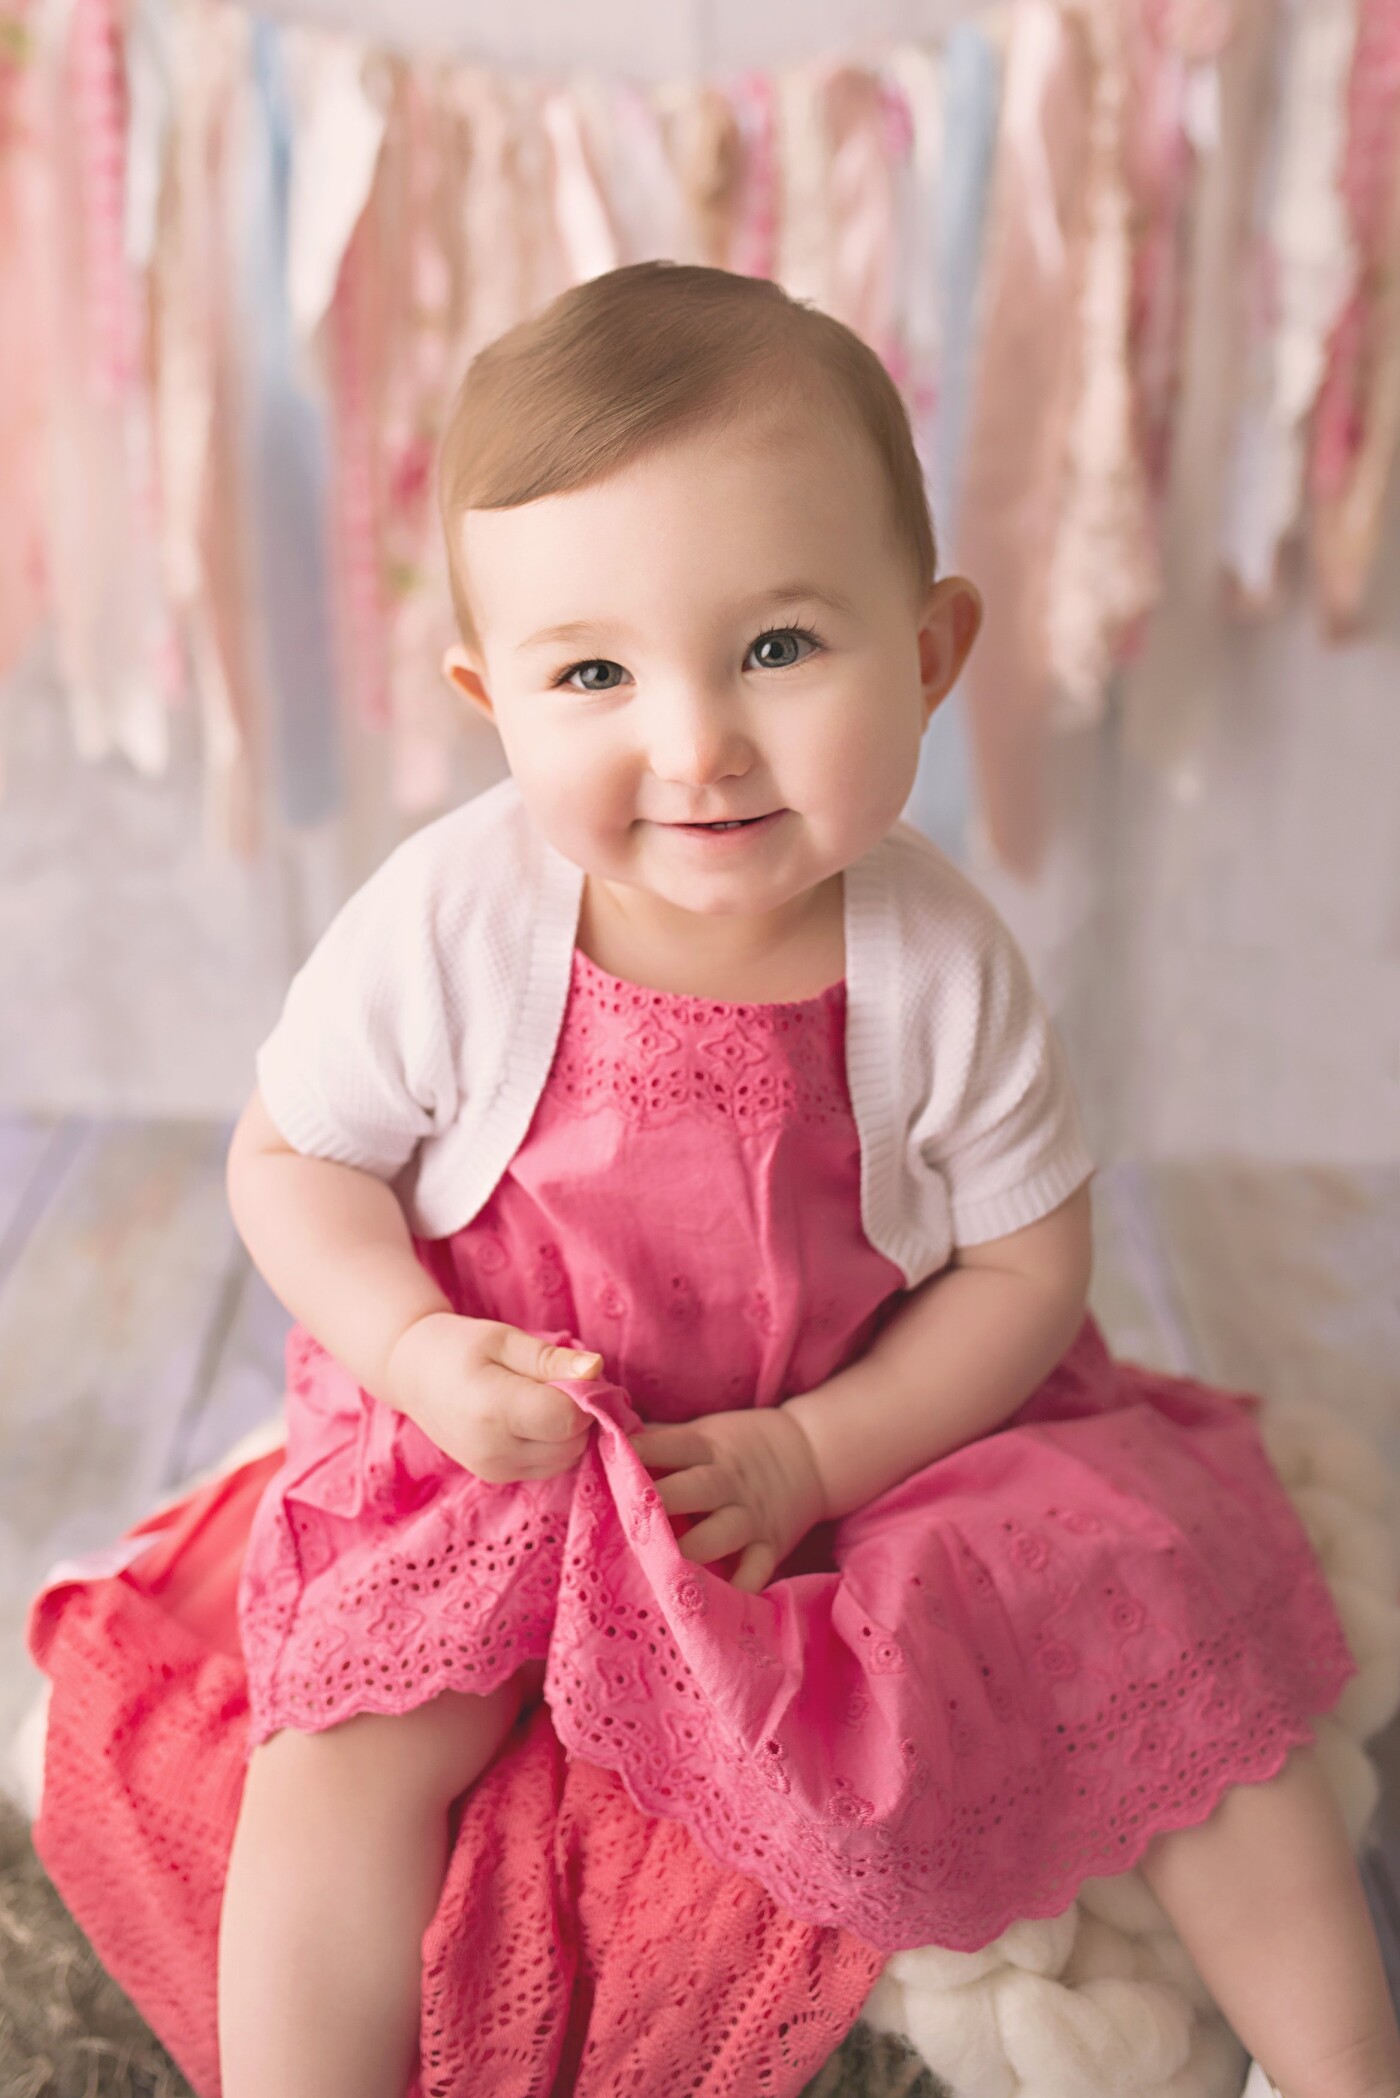 This little sweetheart has the perfect complexion for these lovely pastel colors.  I have been photographing her since she was a newborn and she is a doll.